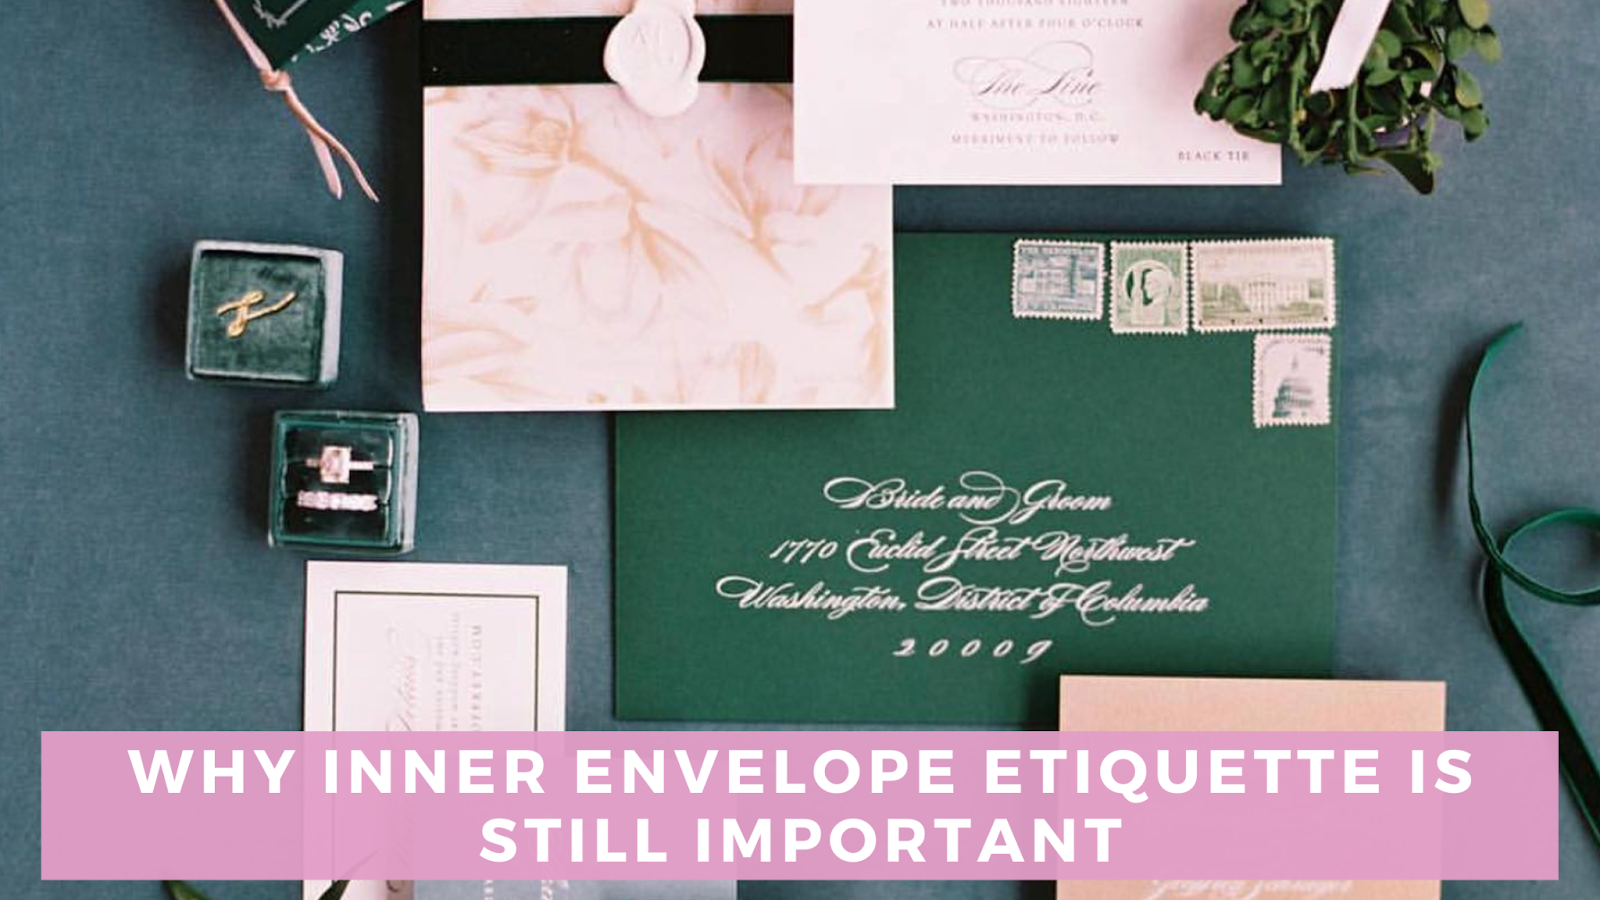 How to Address your Wedding Invitations  Our guide to addressing wedding  invitation envelopes according to etiquette